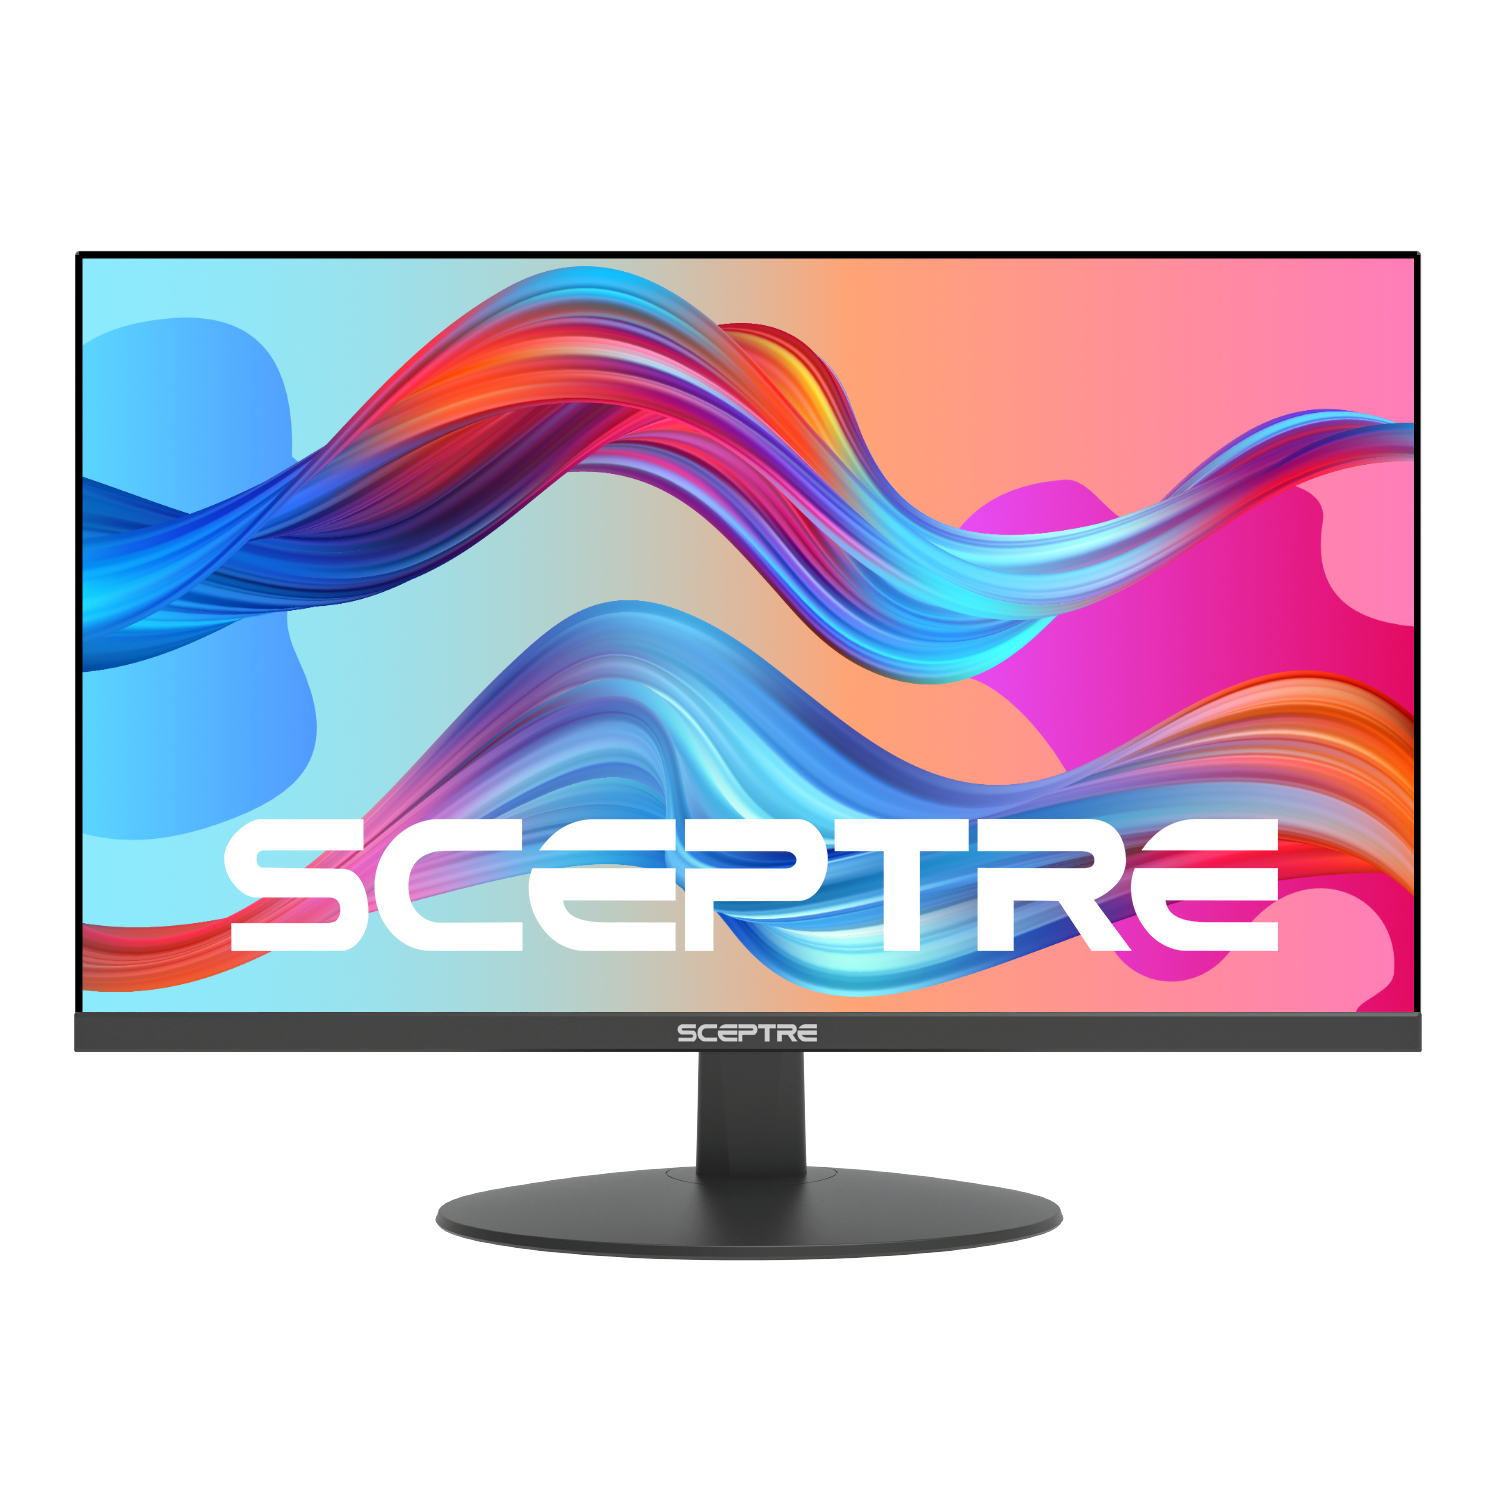 Sceptre IPS 27-inch Computer Monitor 1080p 75Hz HDMI Built-in Speakers, Machine Black (E275W-FPT) - image 1 of 7